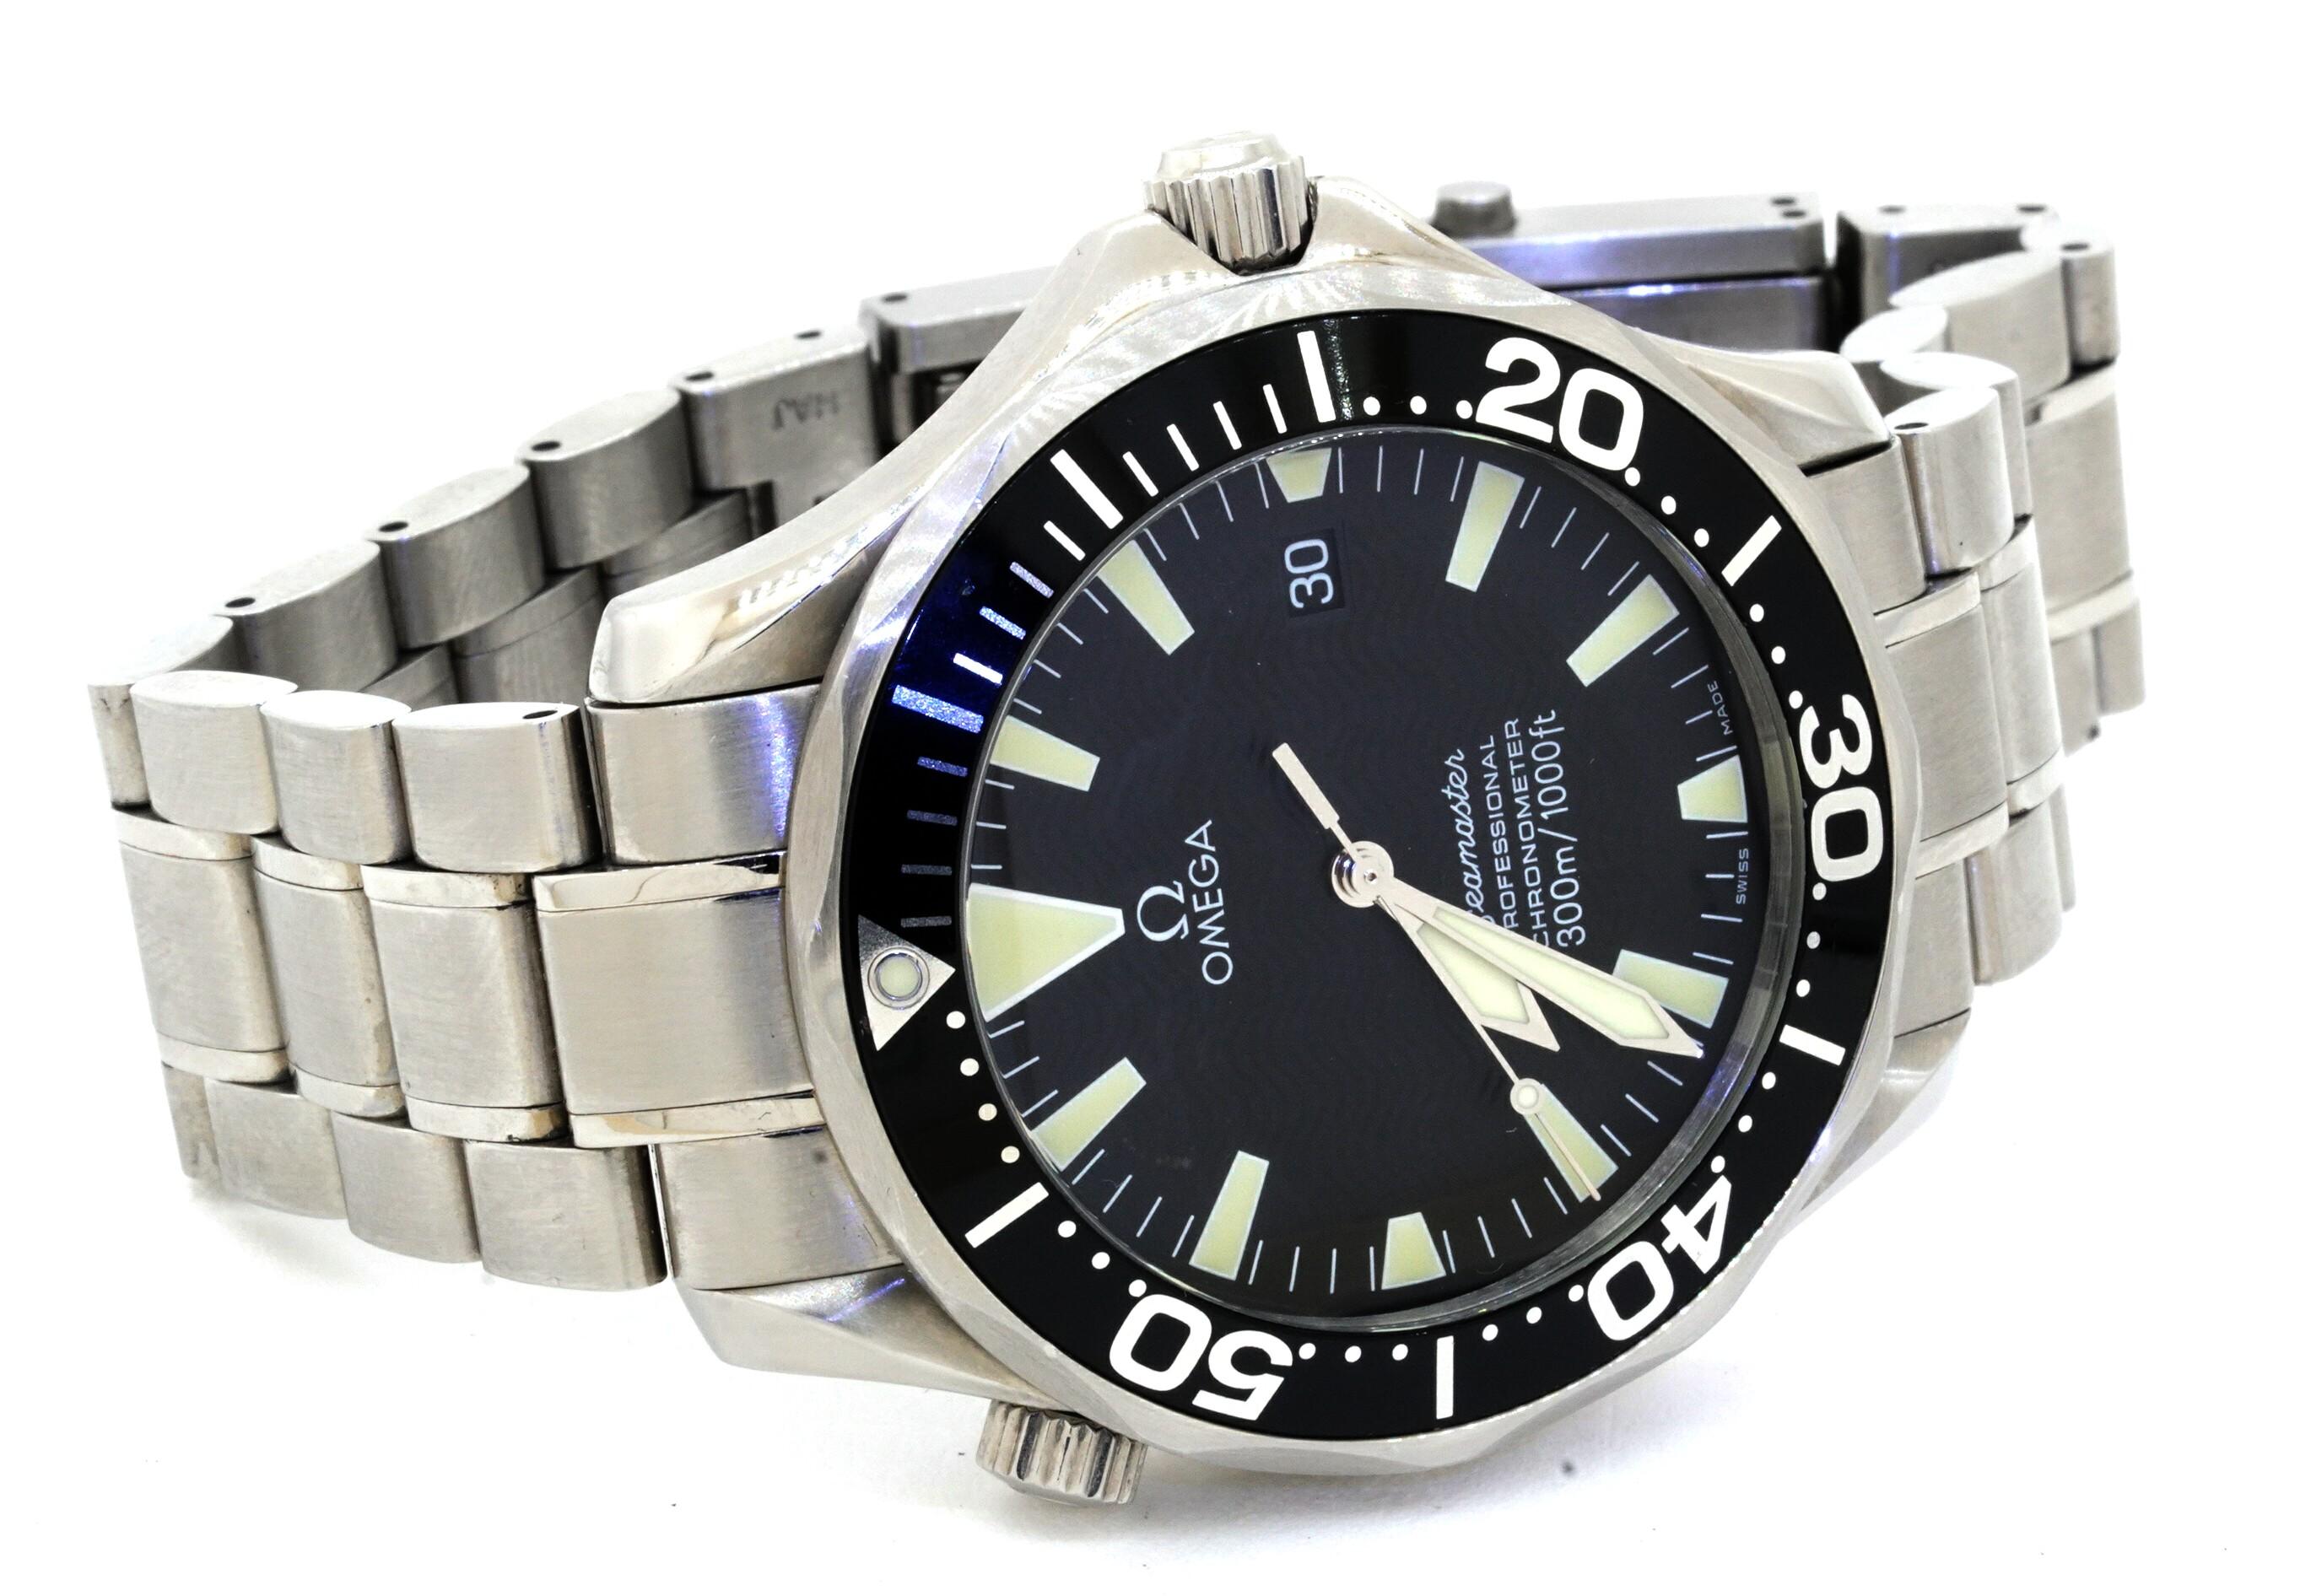 Omega Seamaster SS high fashion 41mm automatic men's dive watch w/ date. This compelling watch is crafted in durable Stainless steel and features fine quality Swiss made automatic (self-winding) movement. This watch has a sporty wavy textured black